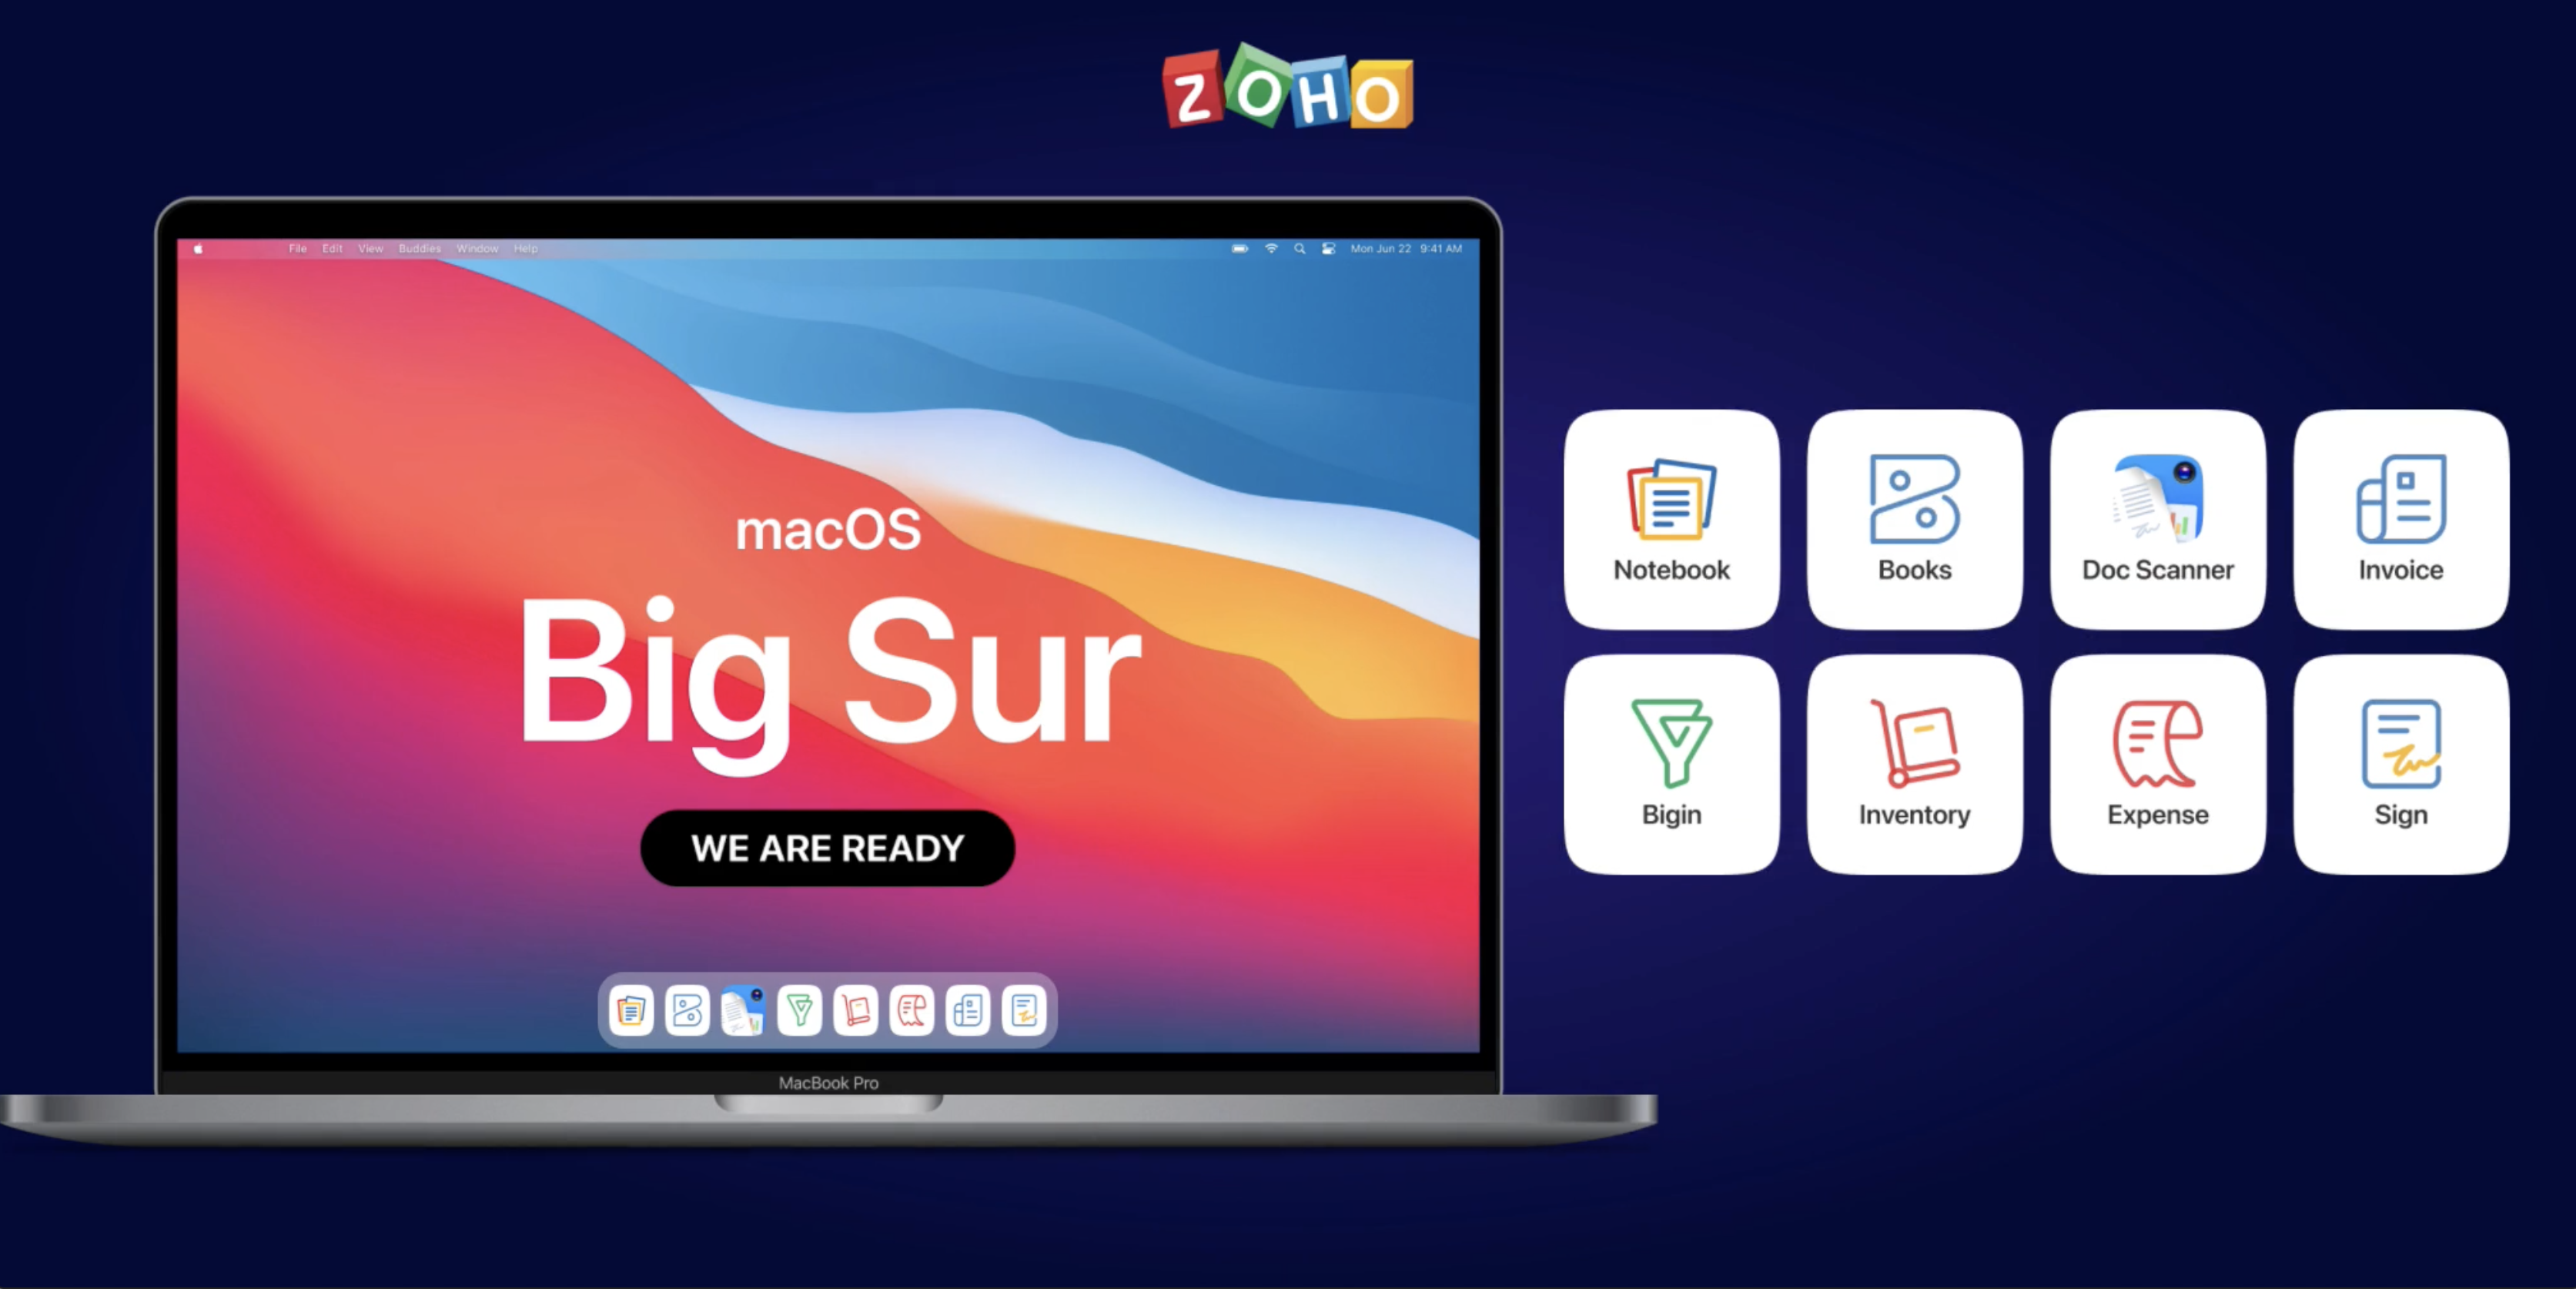 Bringing the macOS Big Sur experience to your Zoho apps